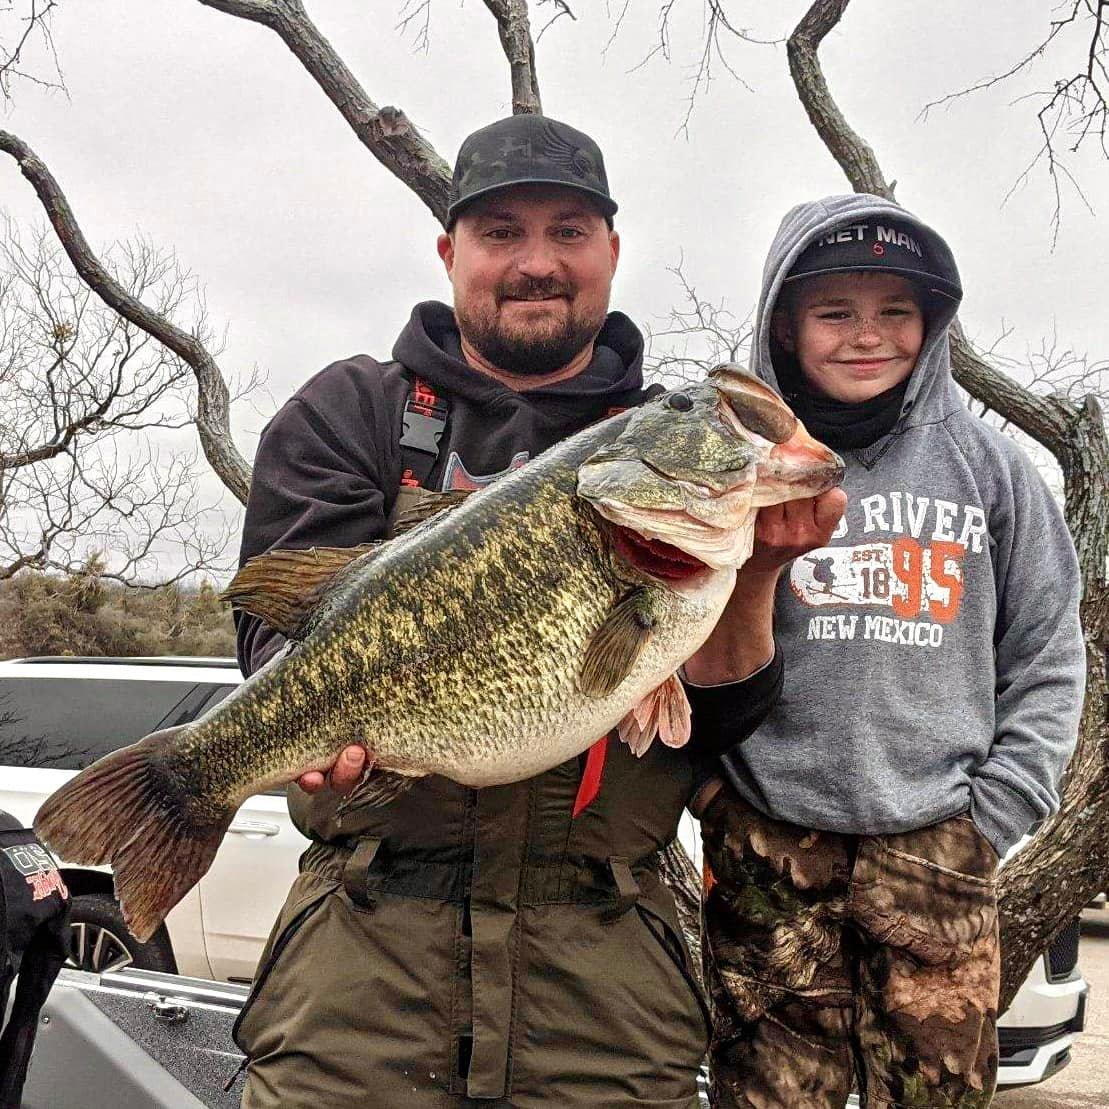 Lady angler catches world record largemouth bass in Texas